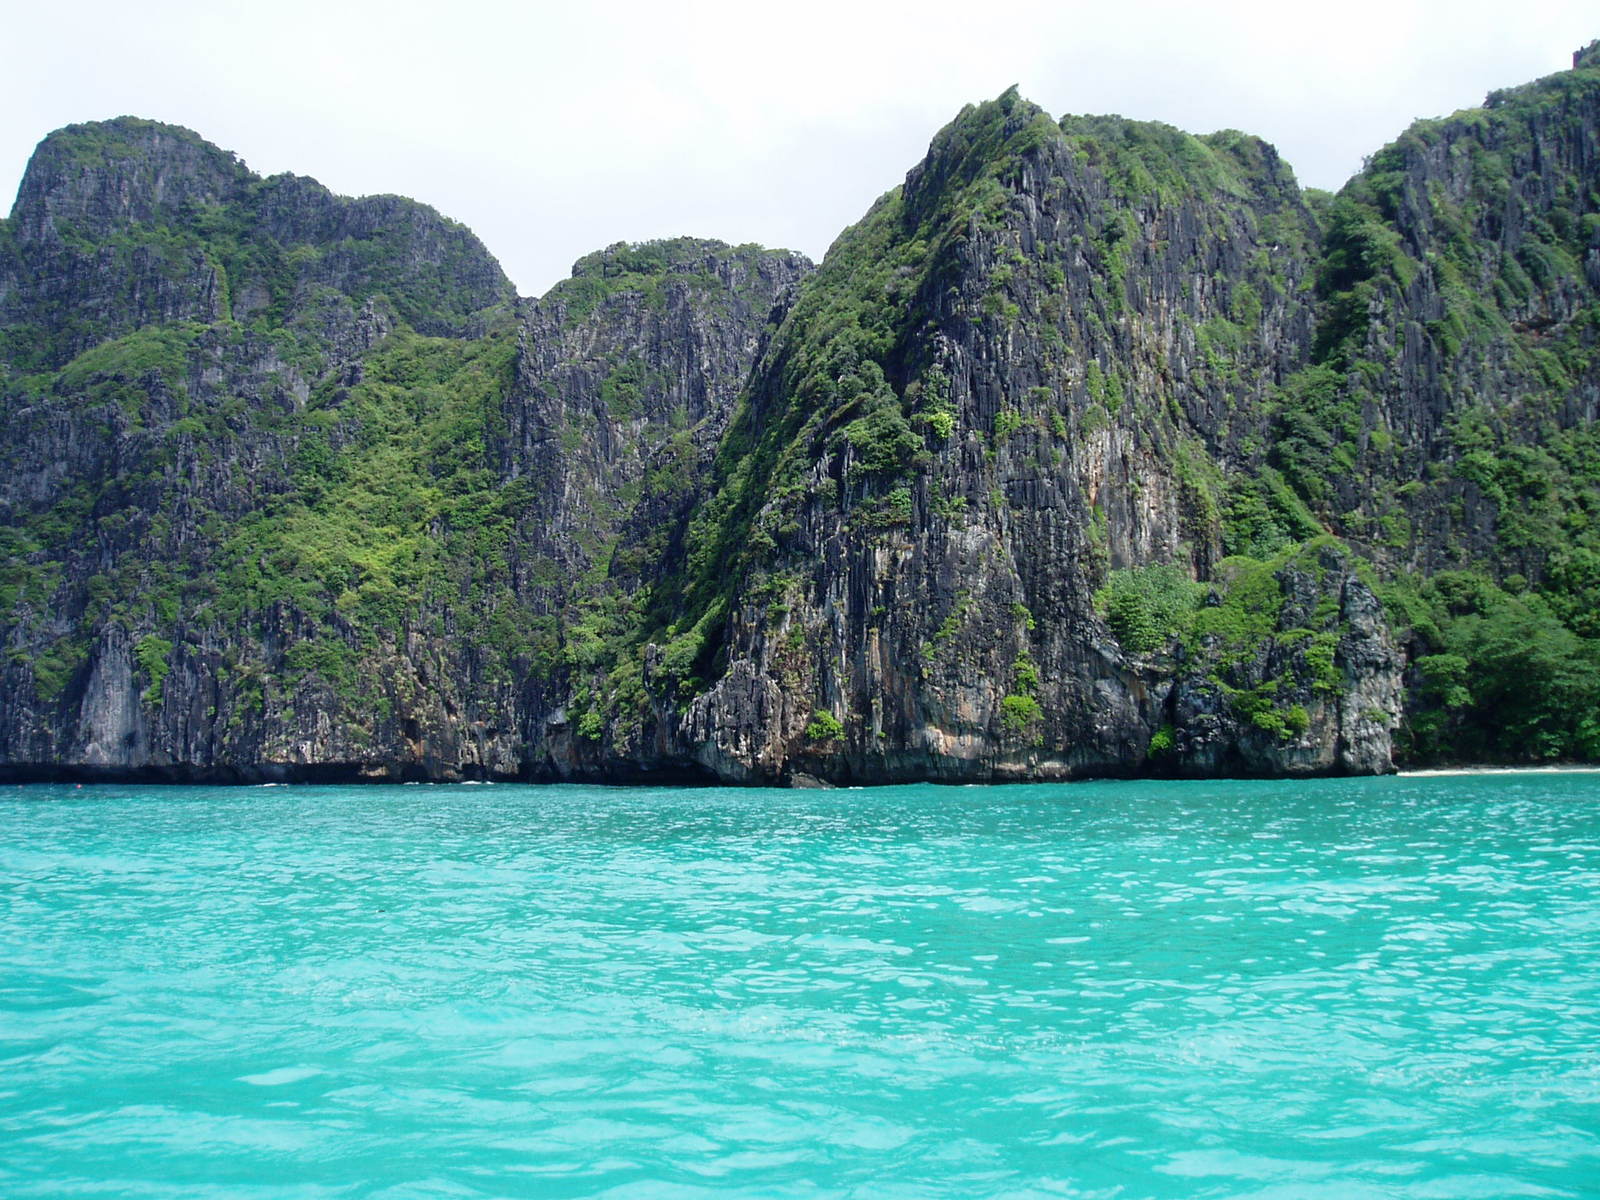 a group of small cliffs in a bay between two smaller mountains